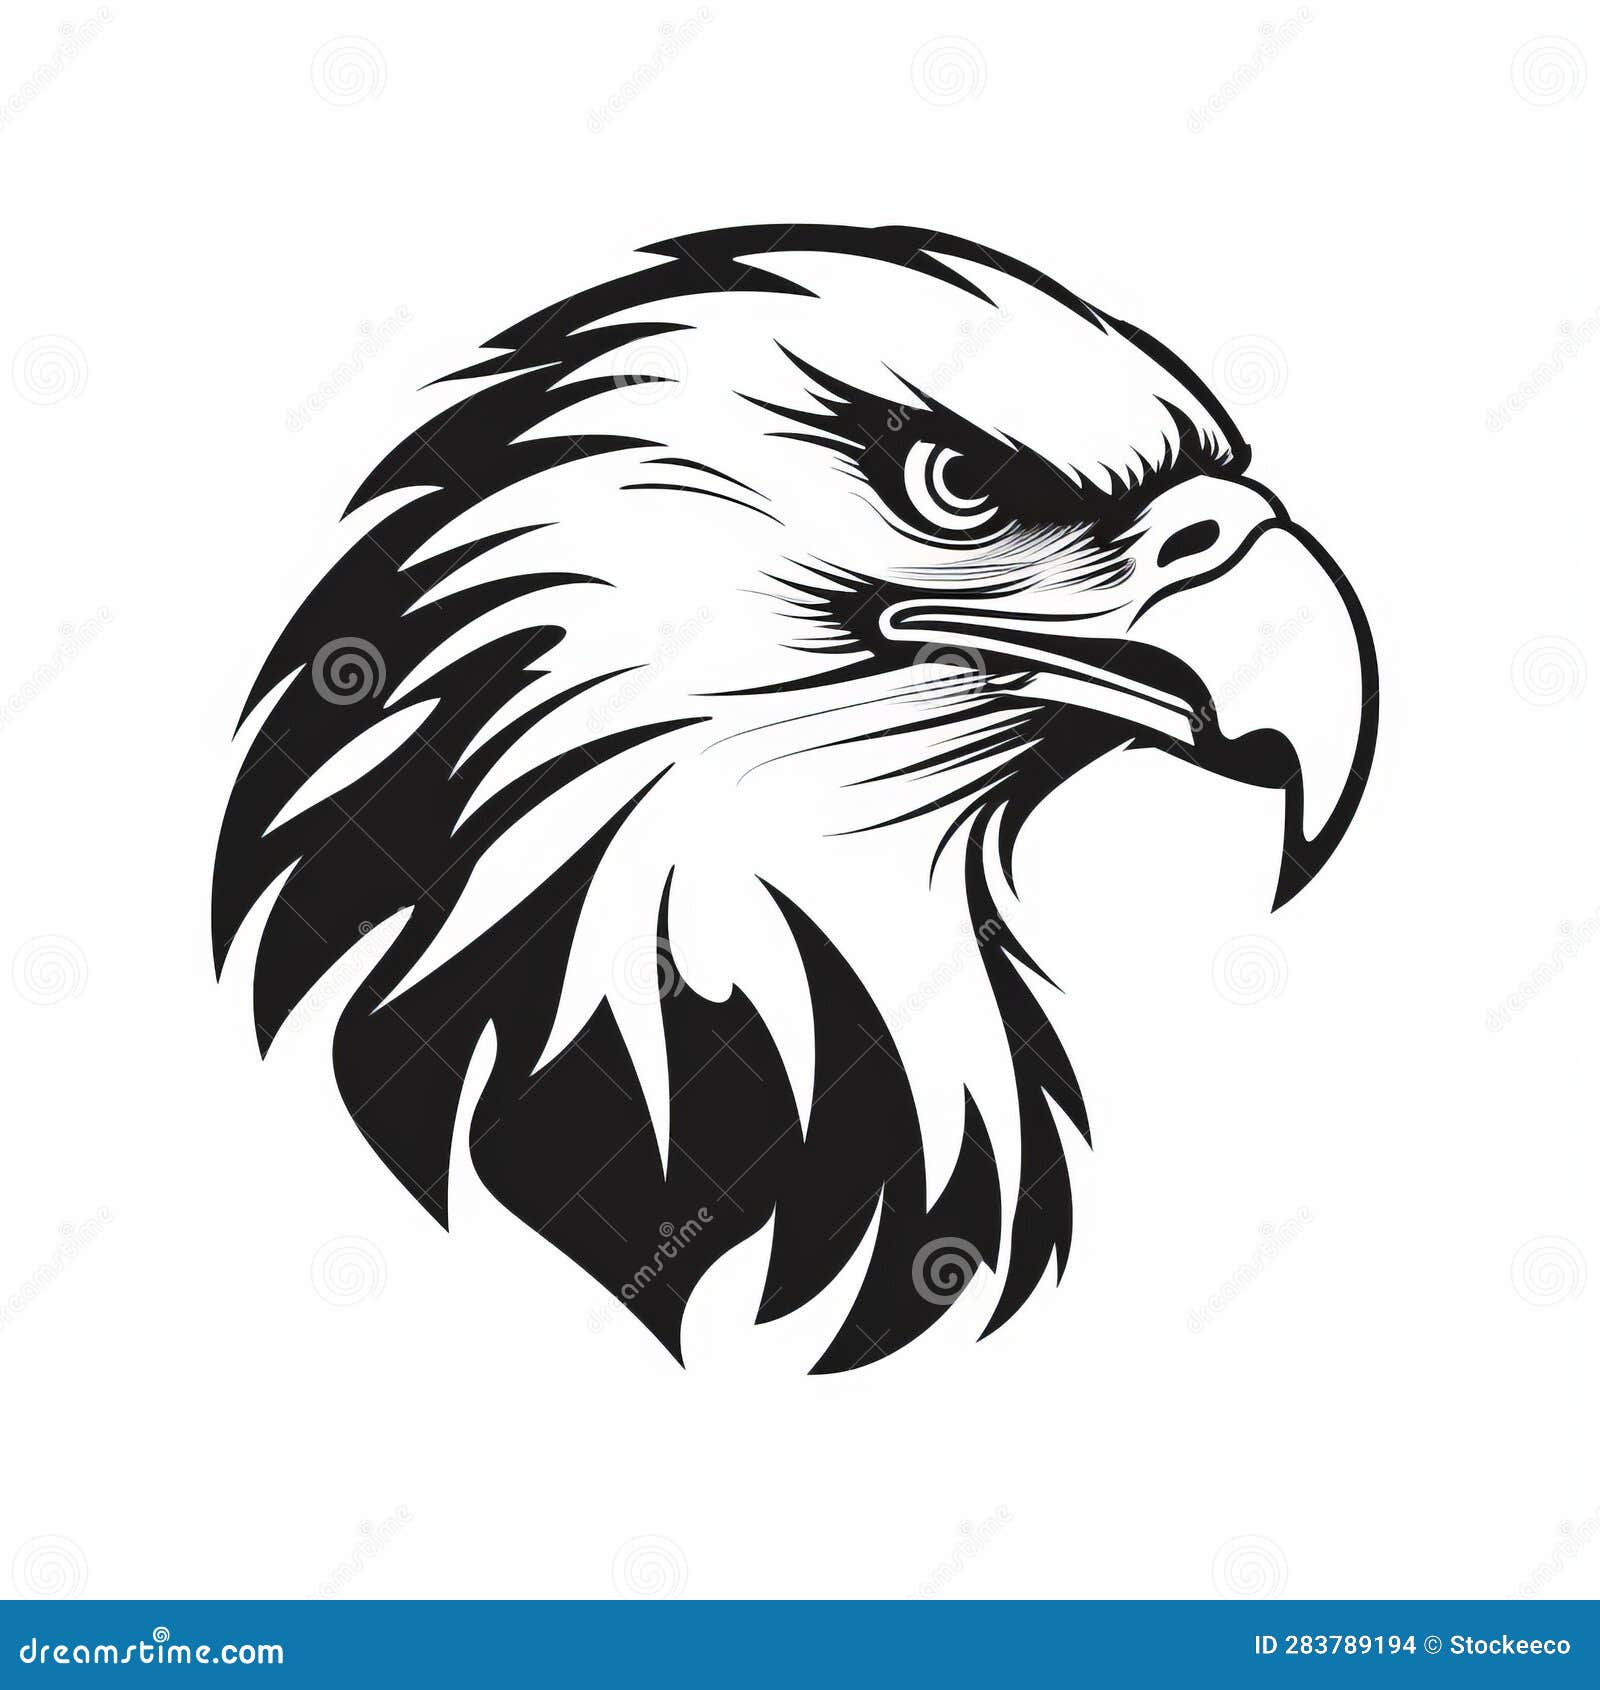 bold and patriotic eagle head icon in black and white